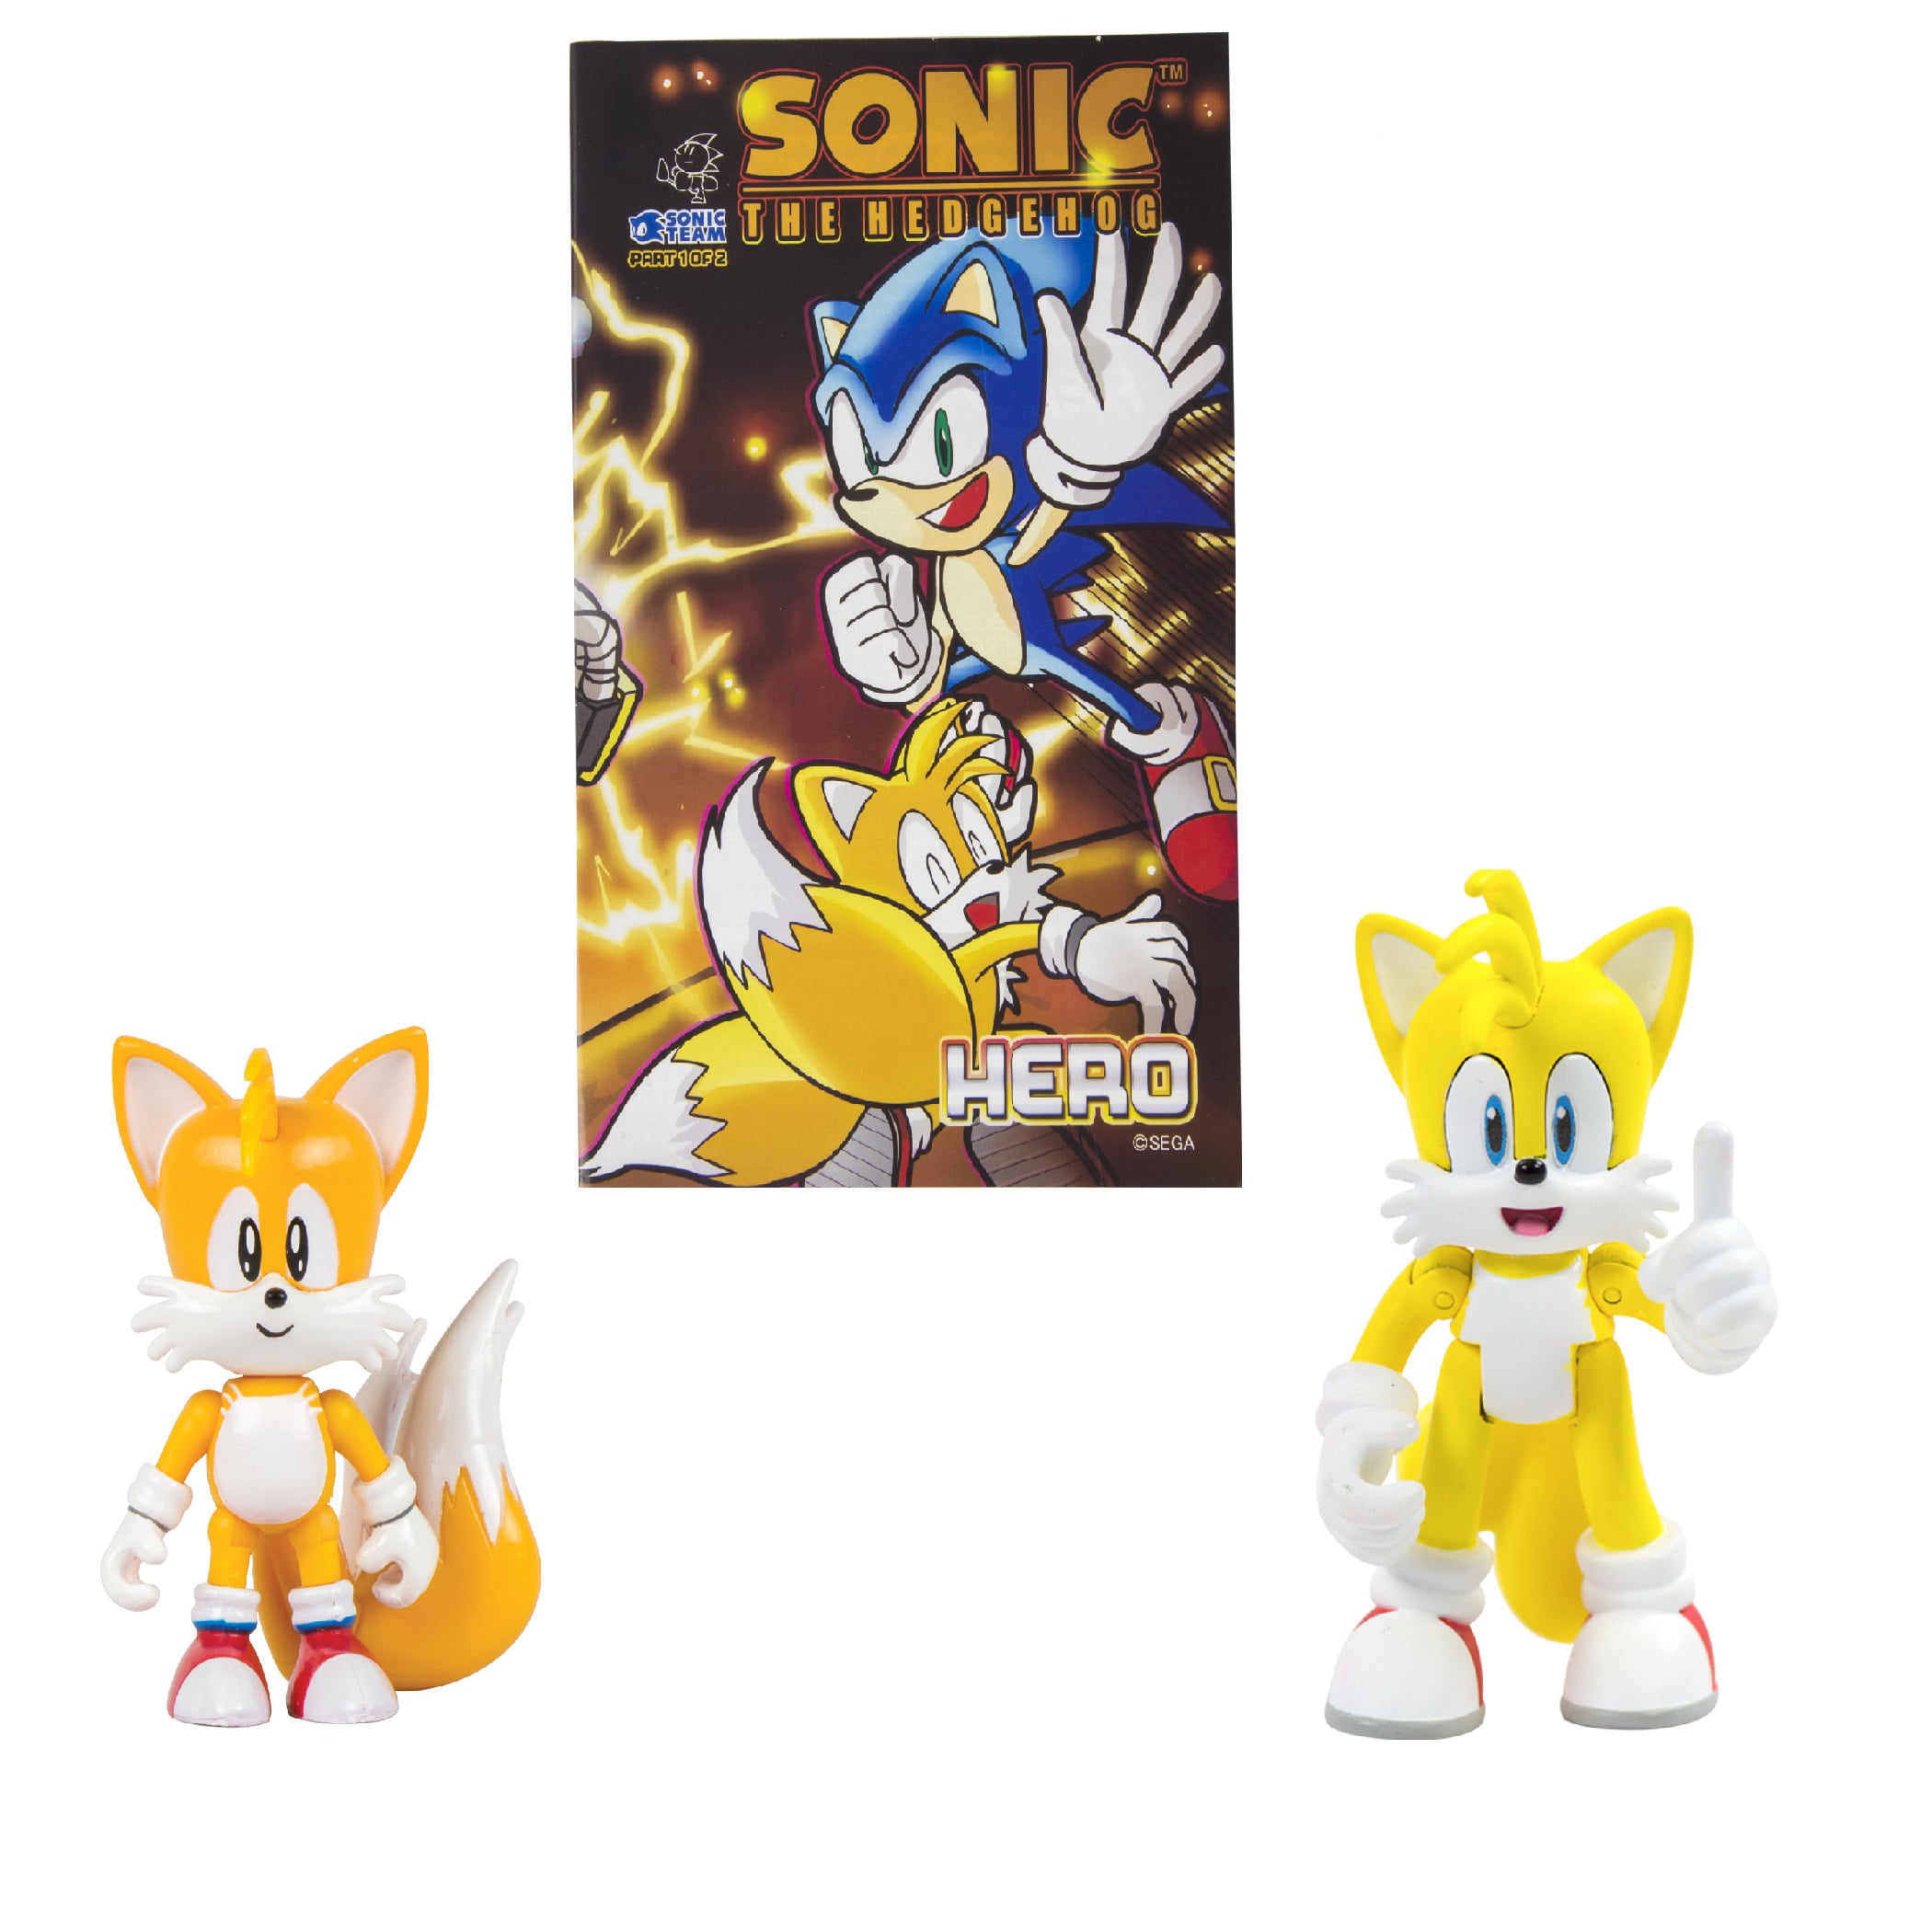 Classic Tails & Modern Tails with Comic Book| Official Licensed Product  from TOMY | Includes Original Sonic Comic Book